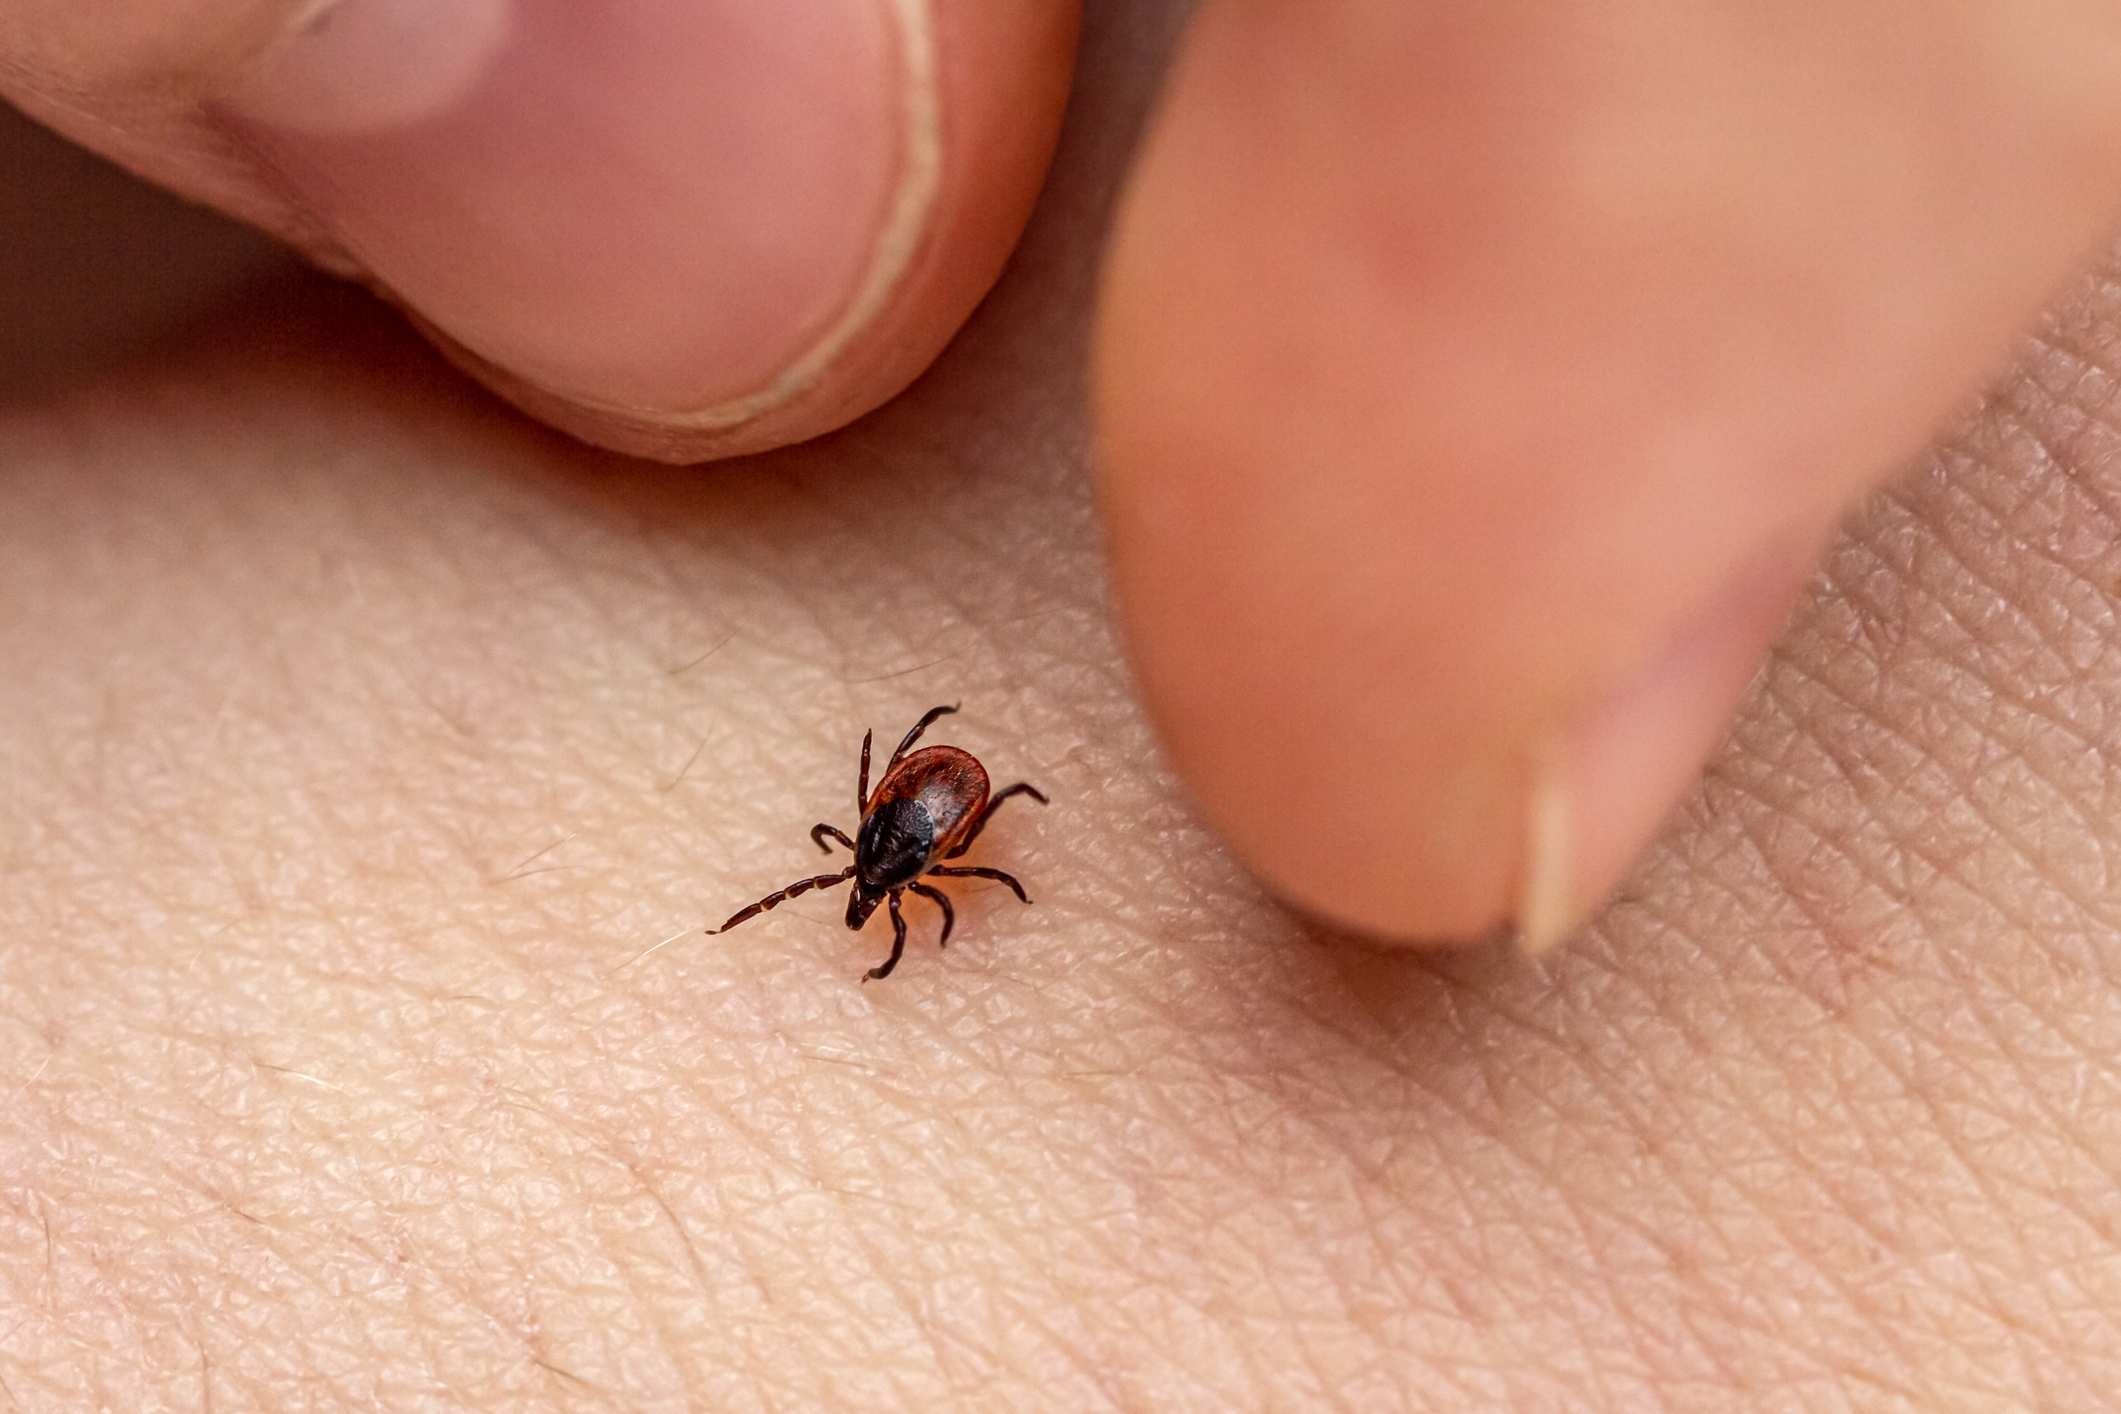 Vaccine rates in Indigenous communities; the origins of The Black Death; understanding illness caused by ticks; and the trial of Theranos founder begins